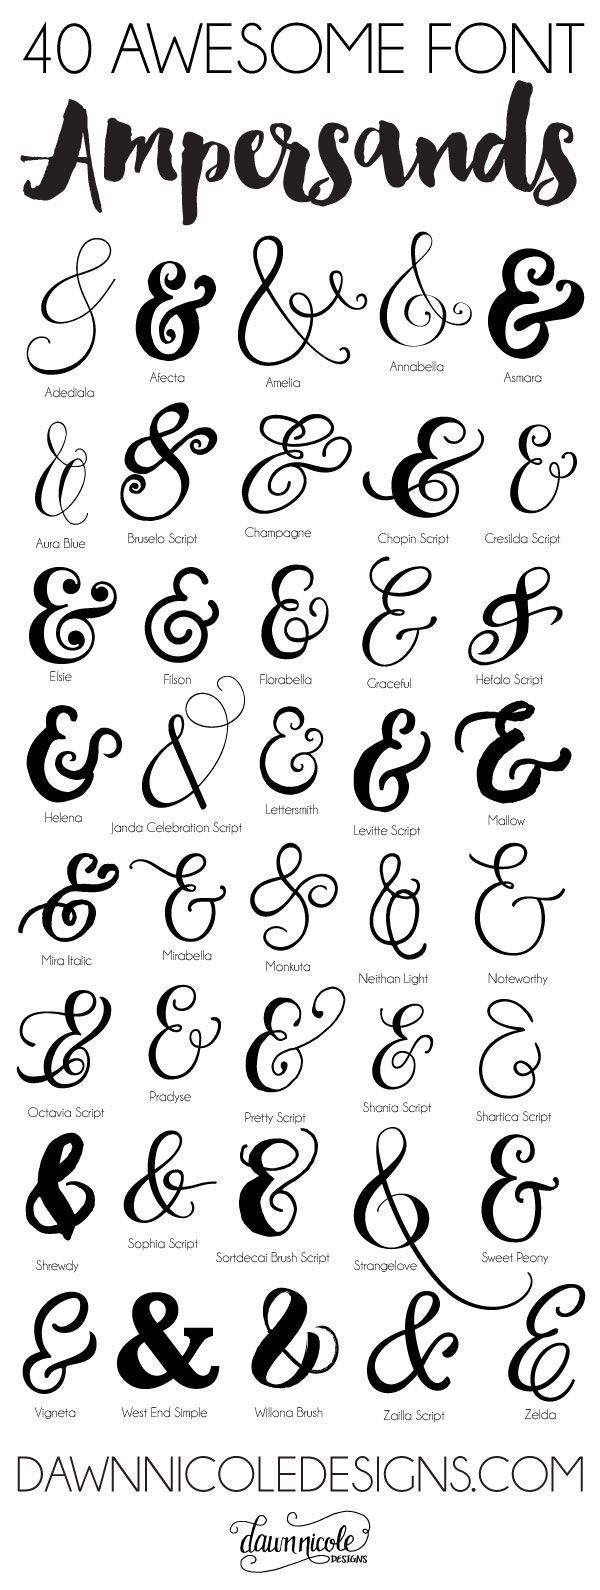 40 Awesome Font Ampersands | dawnnicoledesigns…